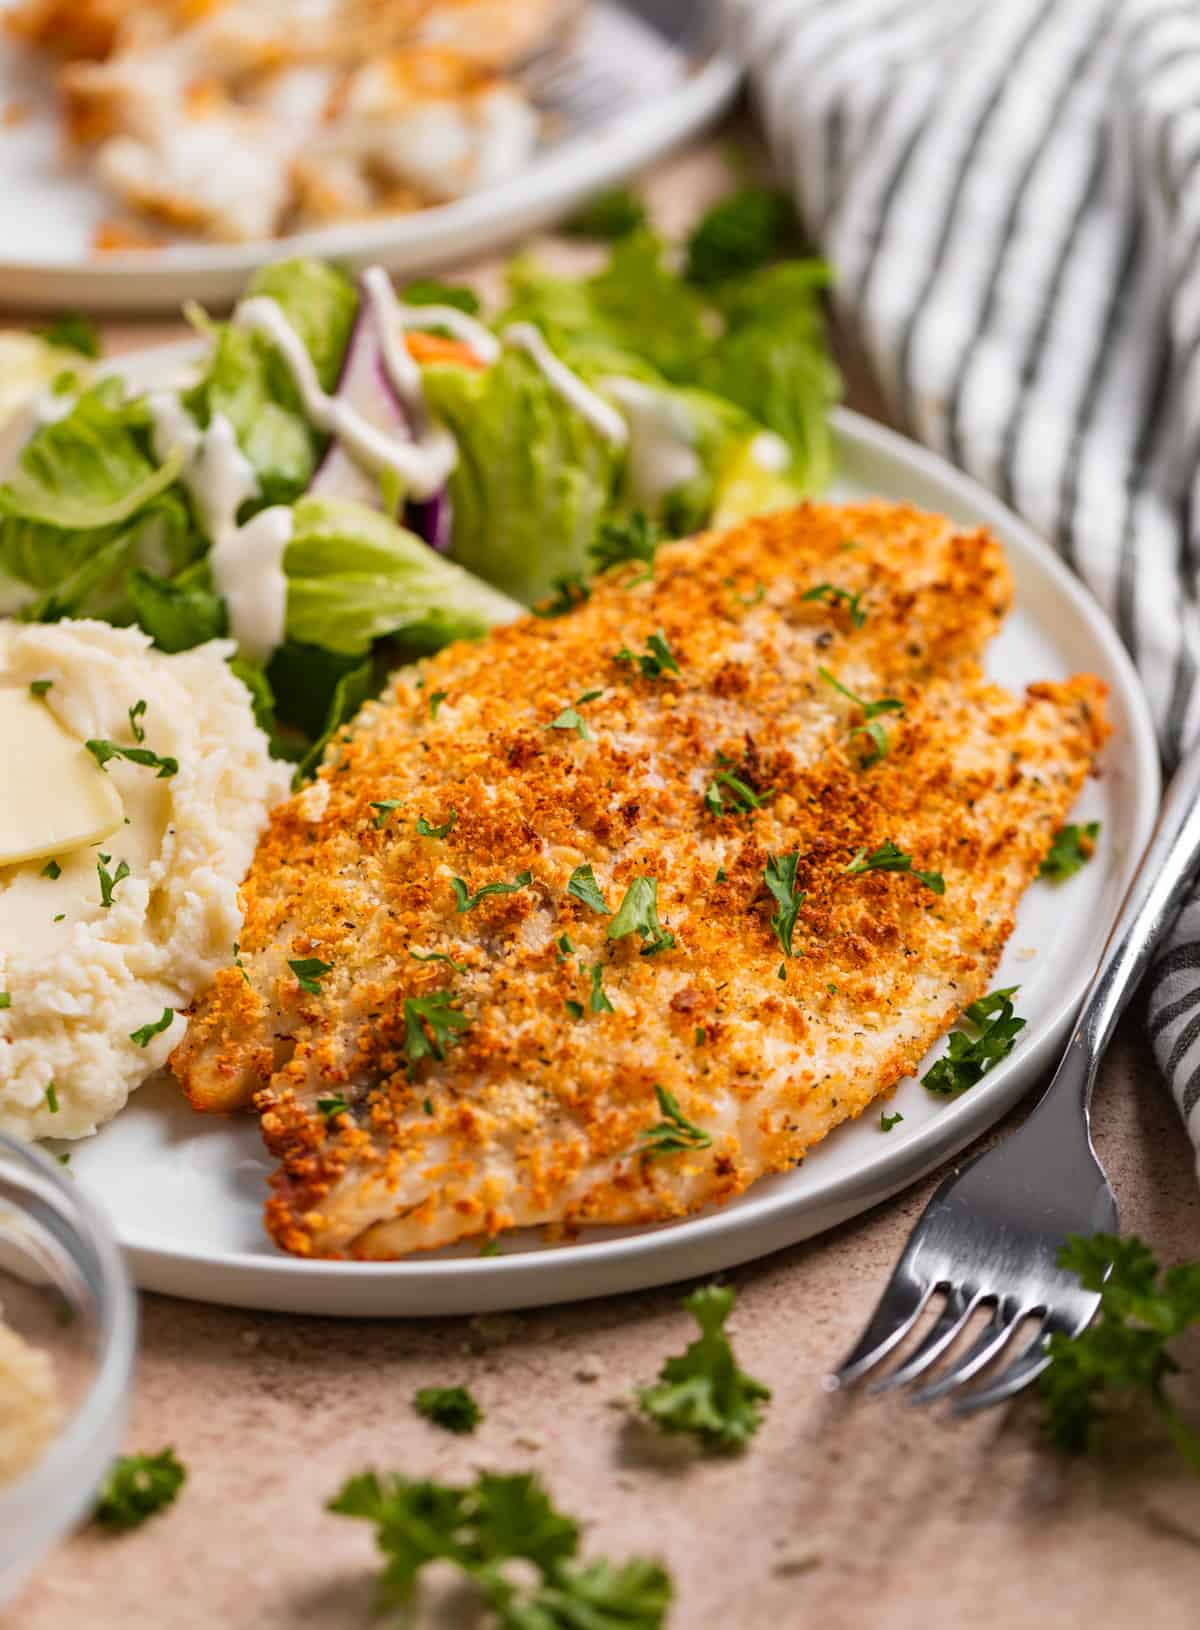 Air fryer parmesan crusted tilapia topped with chopped parsley on plate with salad and mashed potatoes.